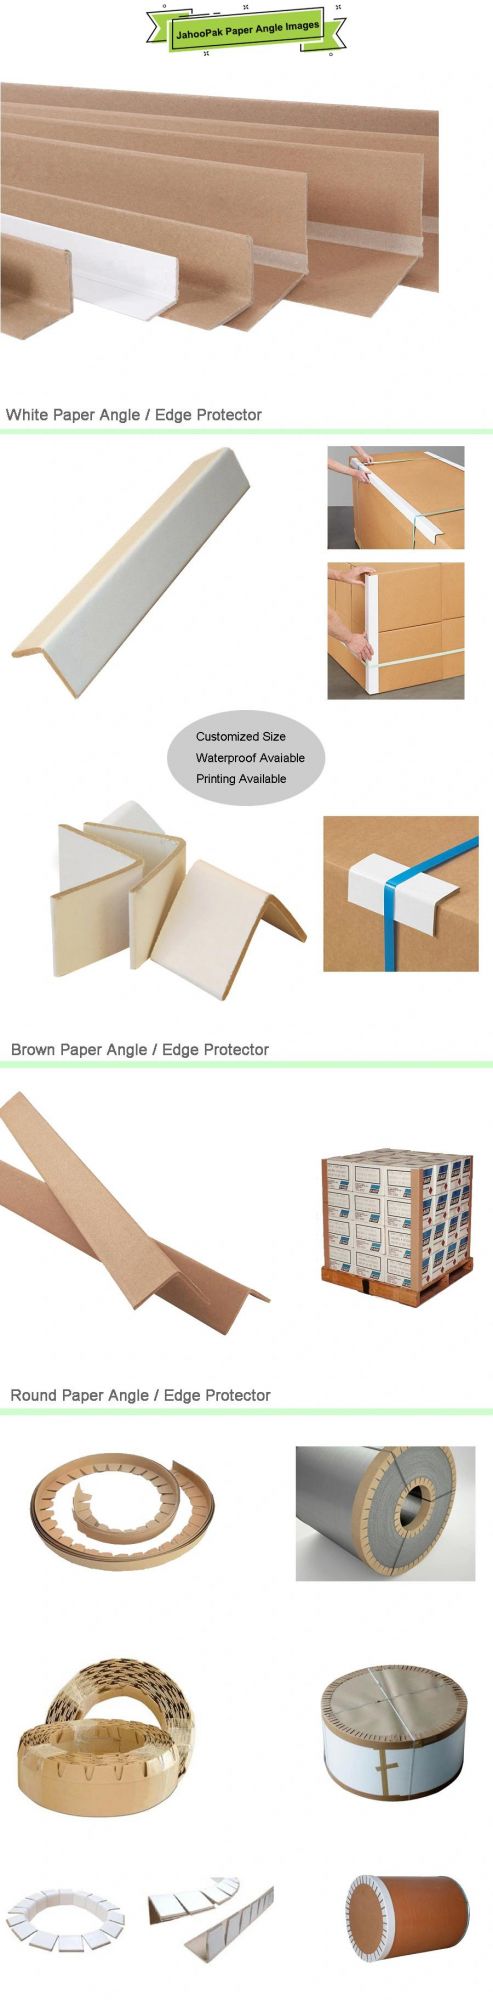 Paper Corner Angle Protector Board for Edge Protection